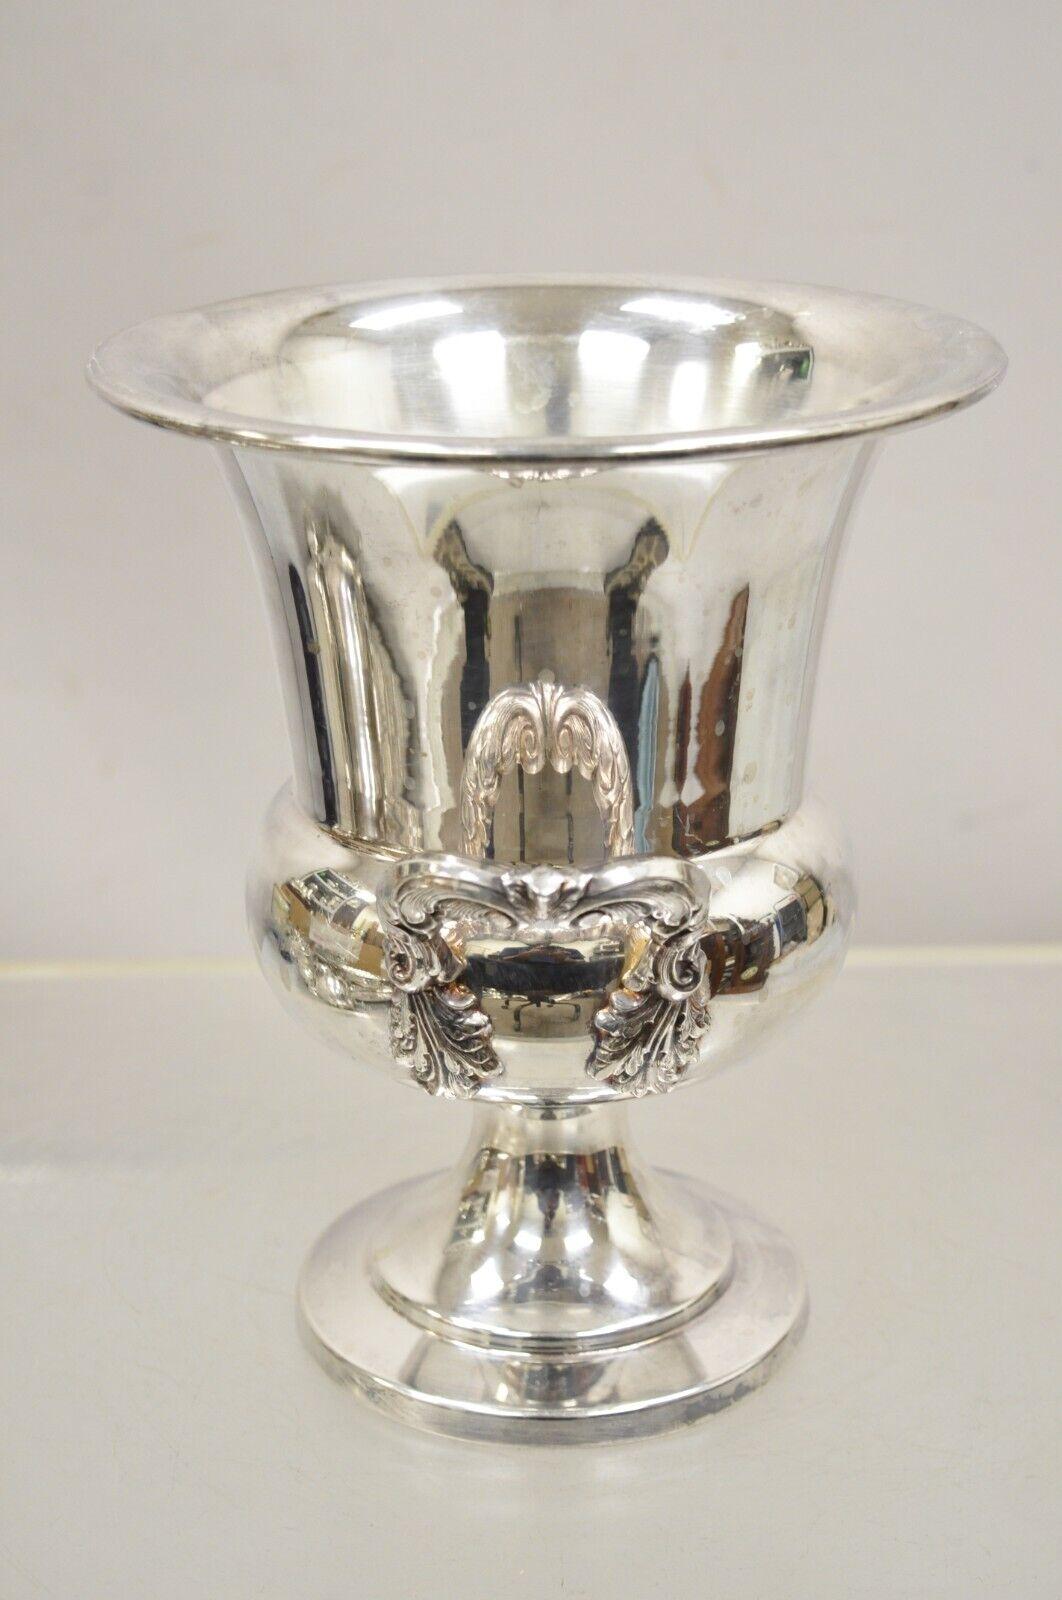 Vintage EPCA Silverplate by Poole 423 Trophy Cup Champagne Chiller Ice Bucket. Circa Mid 20th Century. Measurements: 9.5